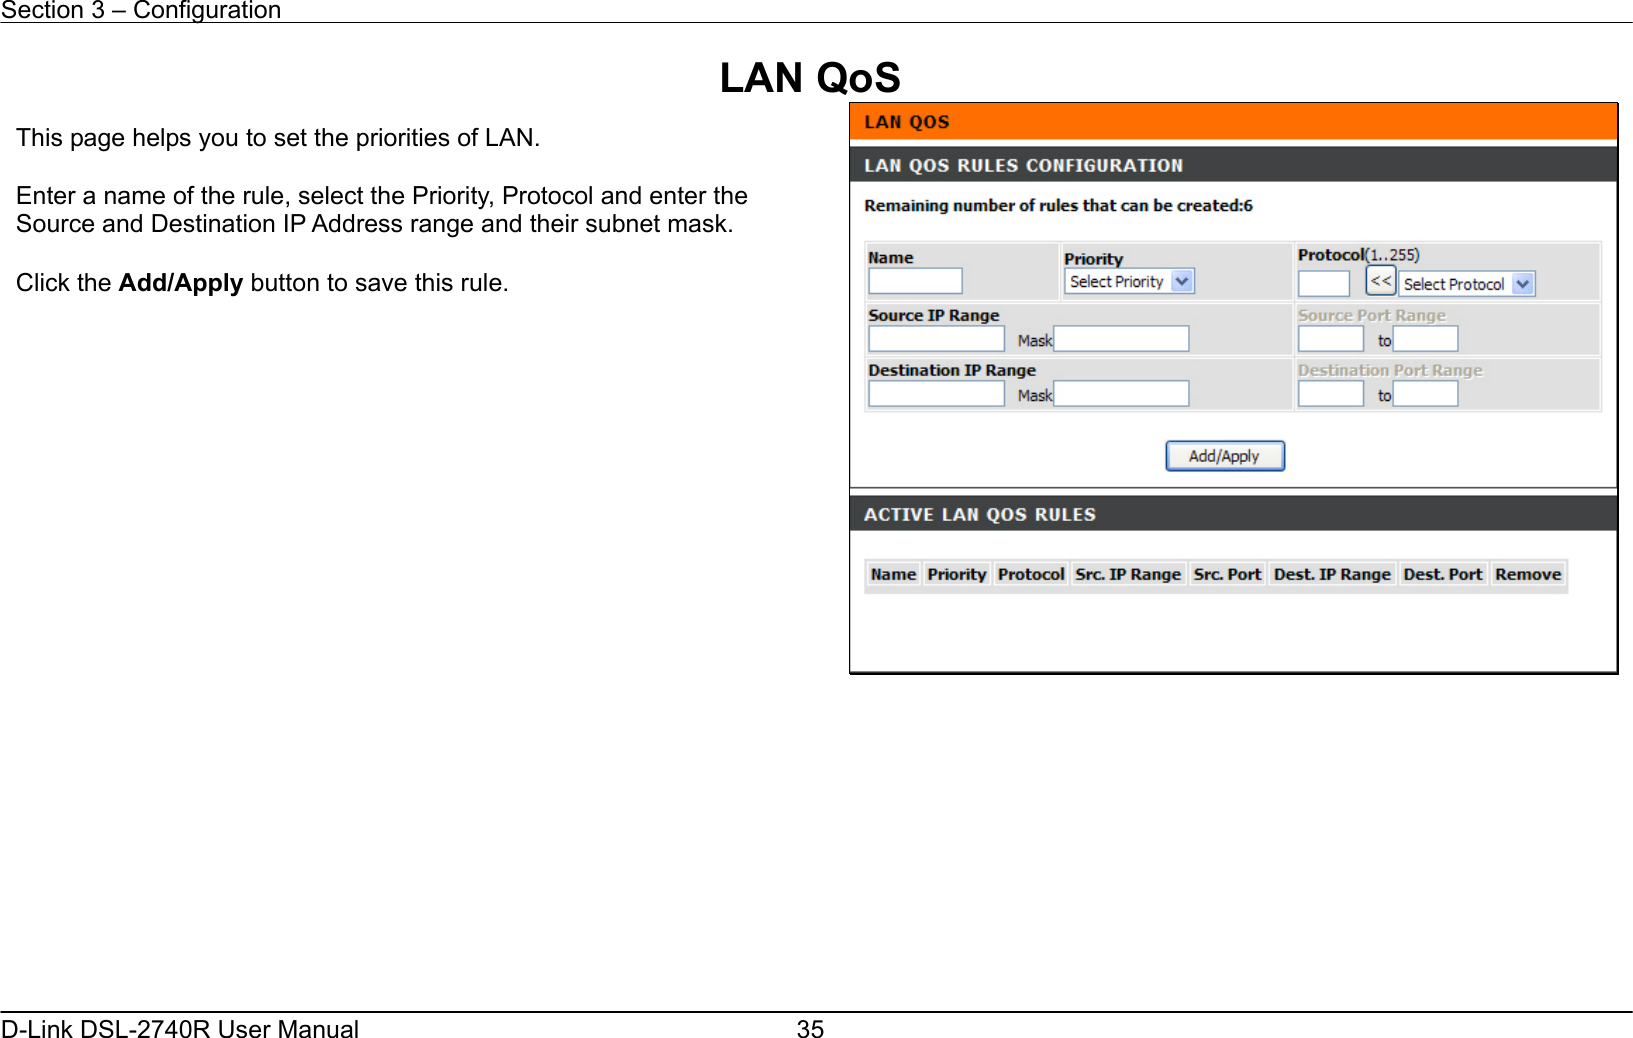 Section 3 – Configuration   D-Link DSL-2740R User Manual  35LAN QoS            This page helps you to set the priorities of LAN.    Enter a name of the rule, select the Priority, Protocol and enter the Source and Destination IP Address range and their subnet mask.  Click the Add/Apply button to save this rule. 